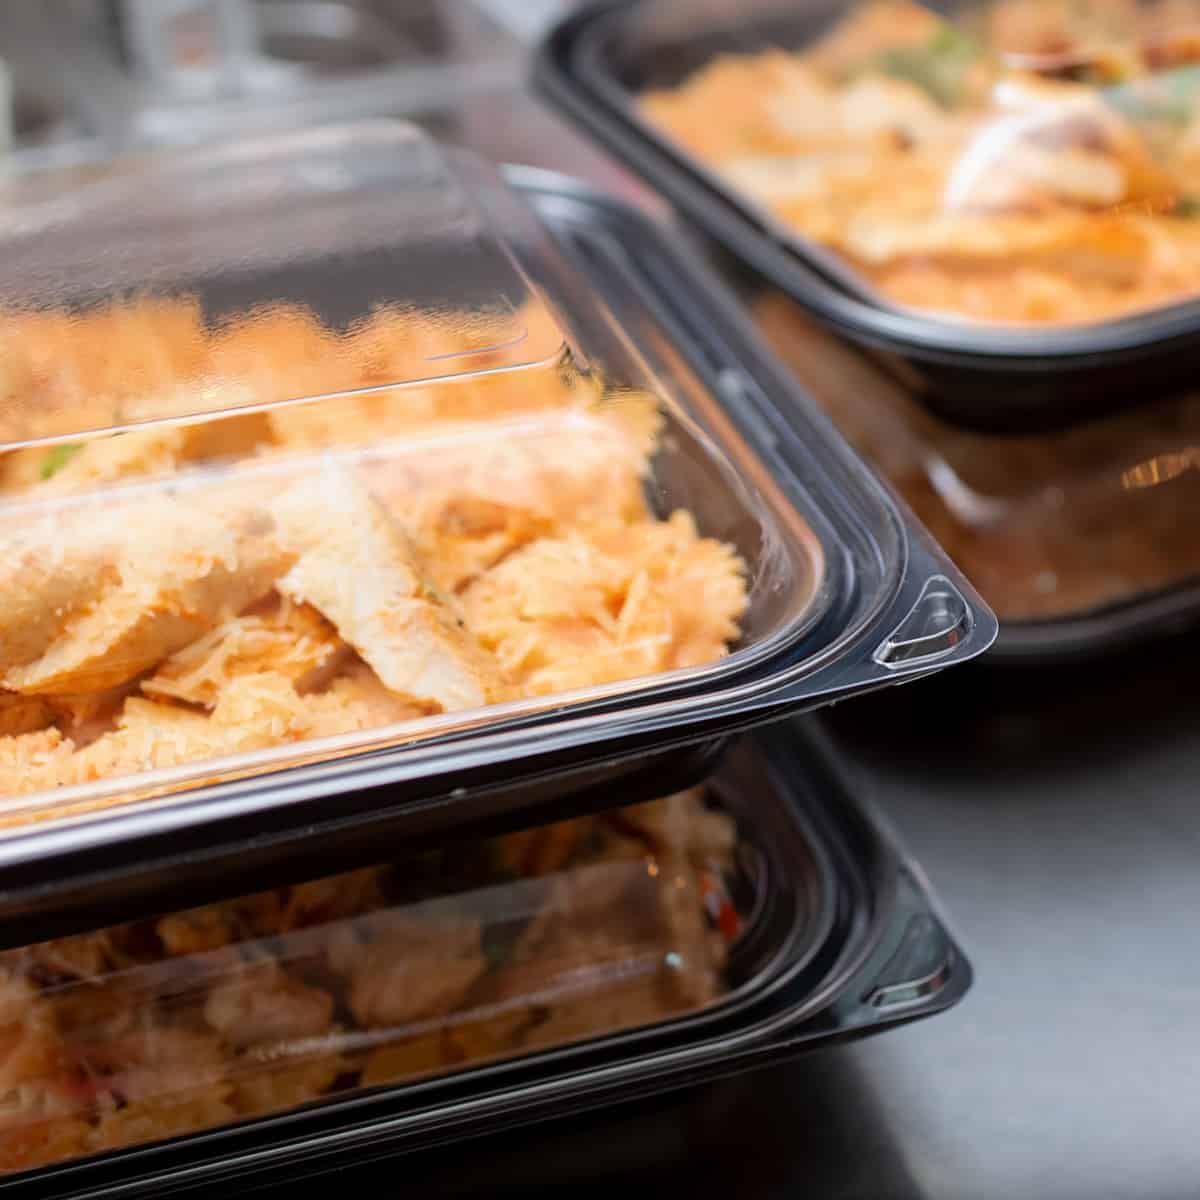 Plastic to go containers filed with leftovers